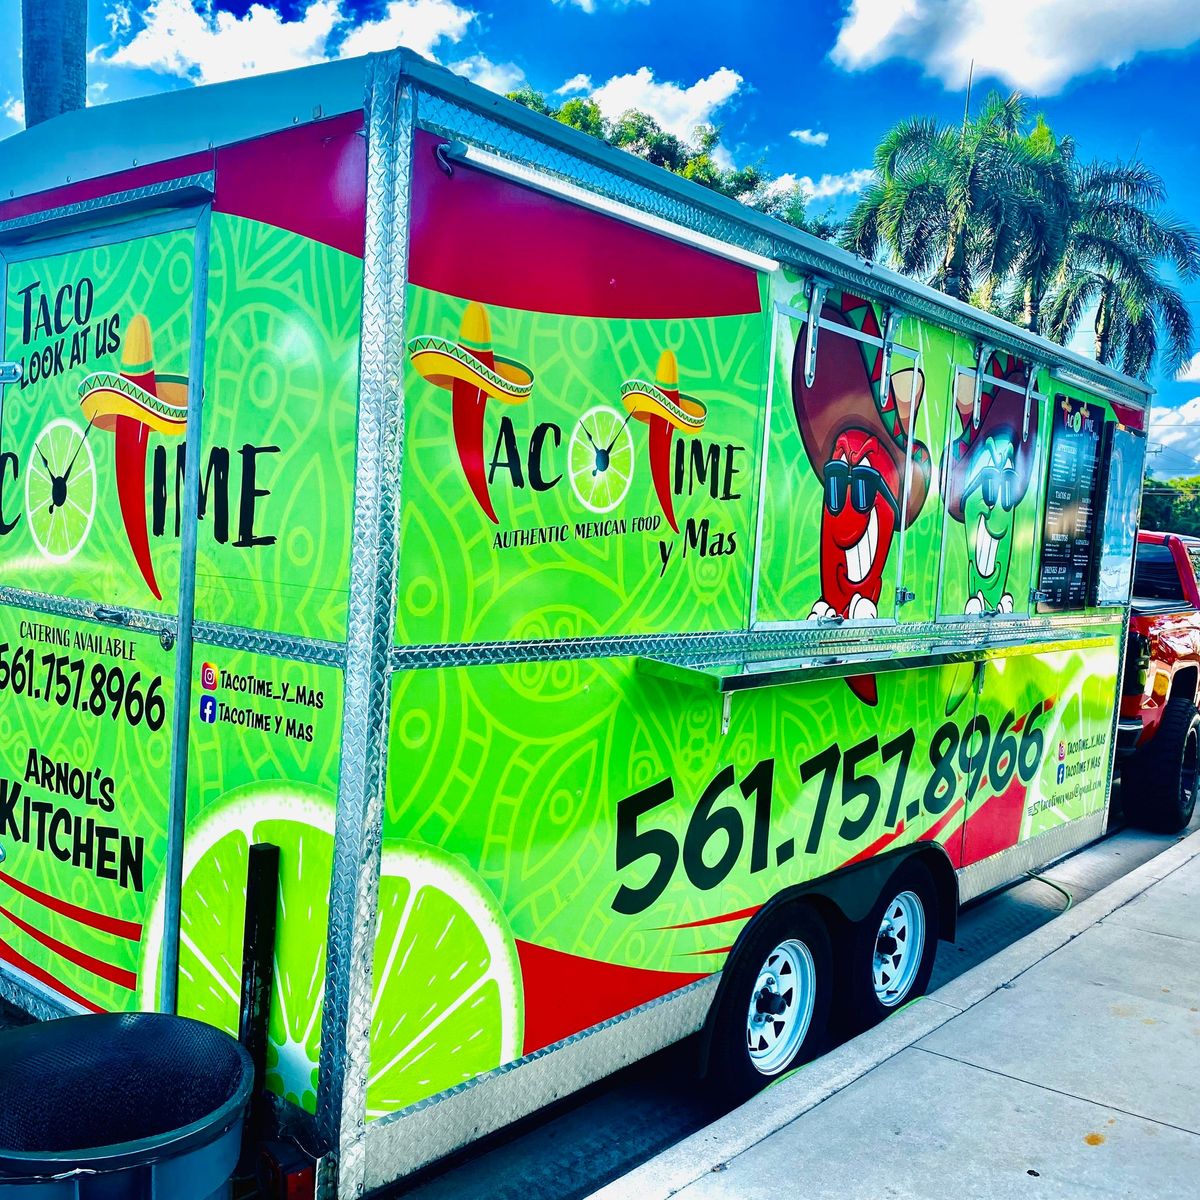 Food Truck Friday with Taco Time Y Mas